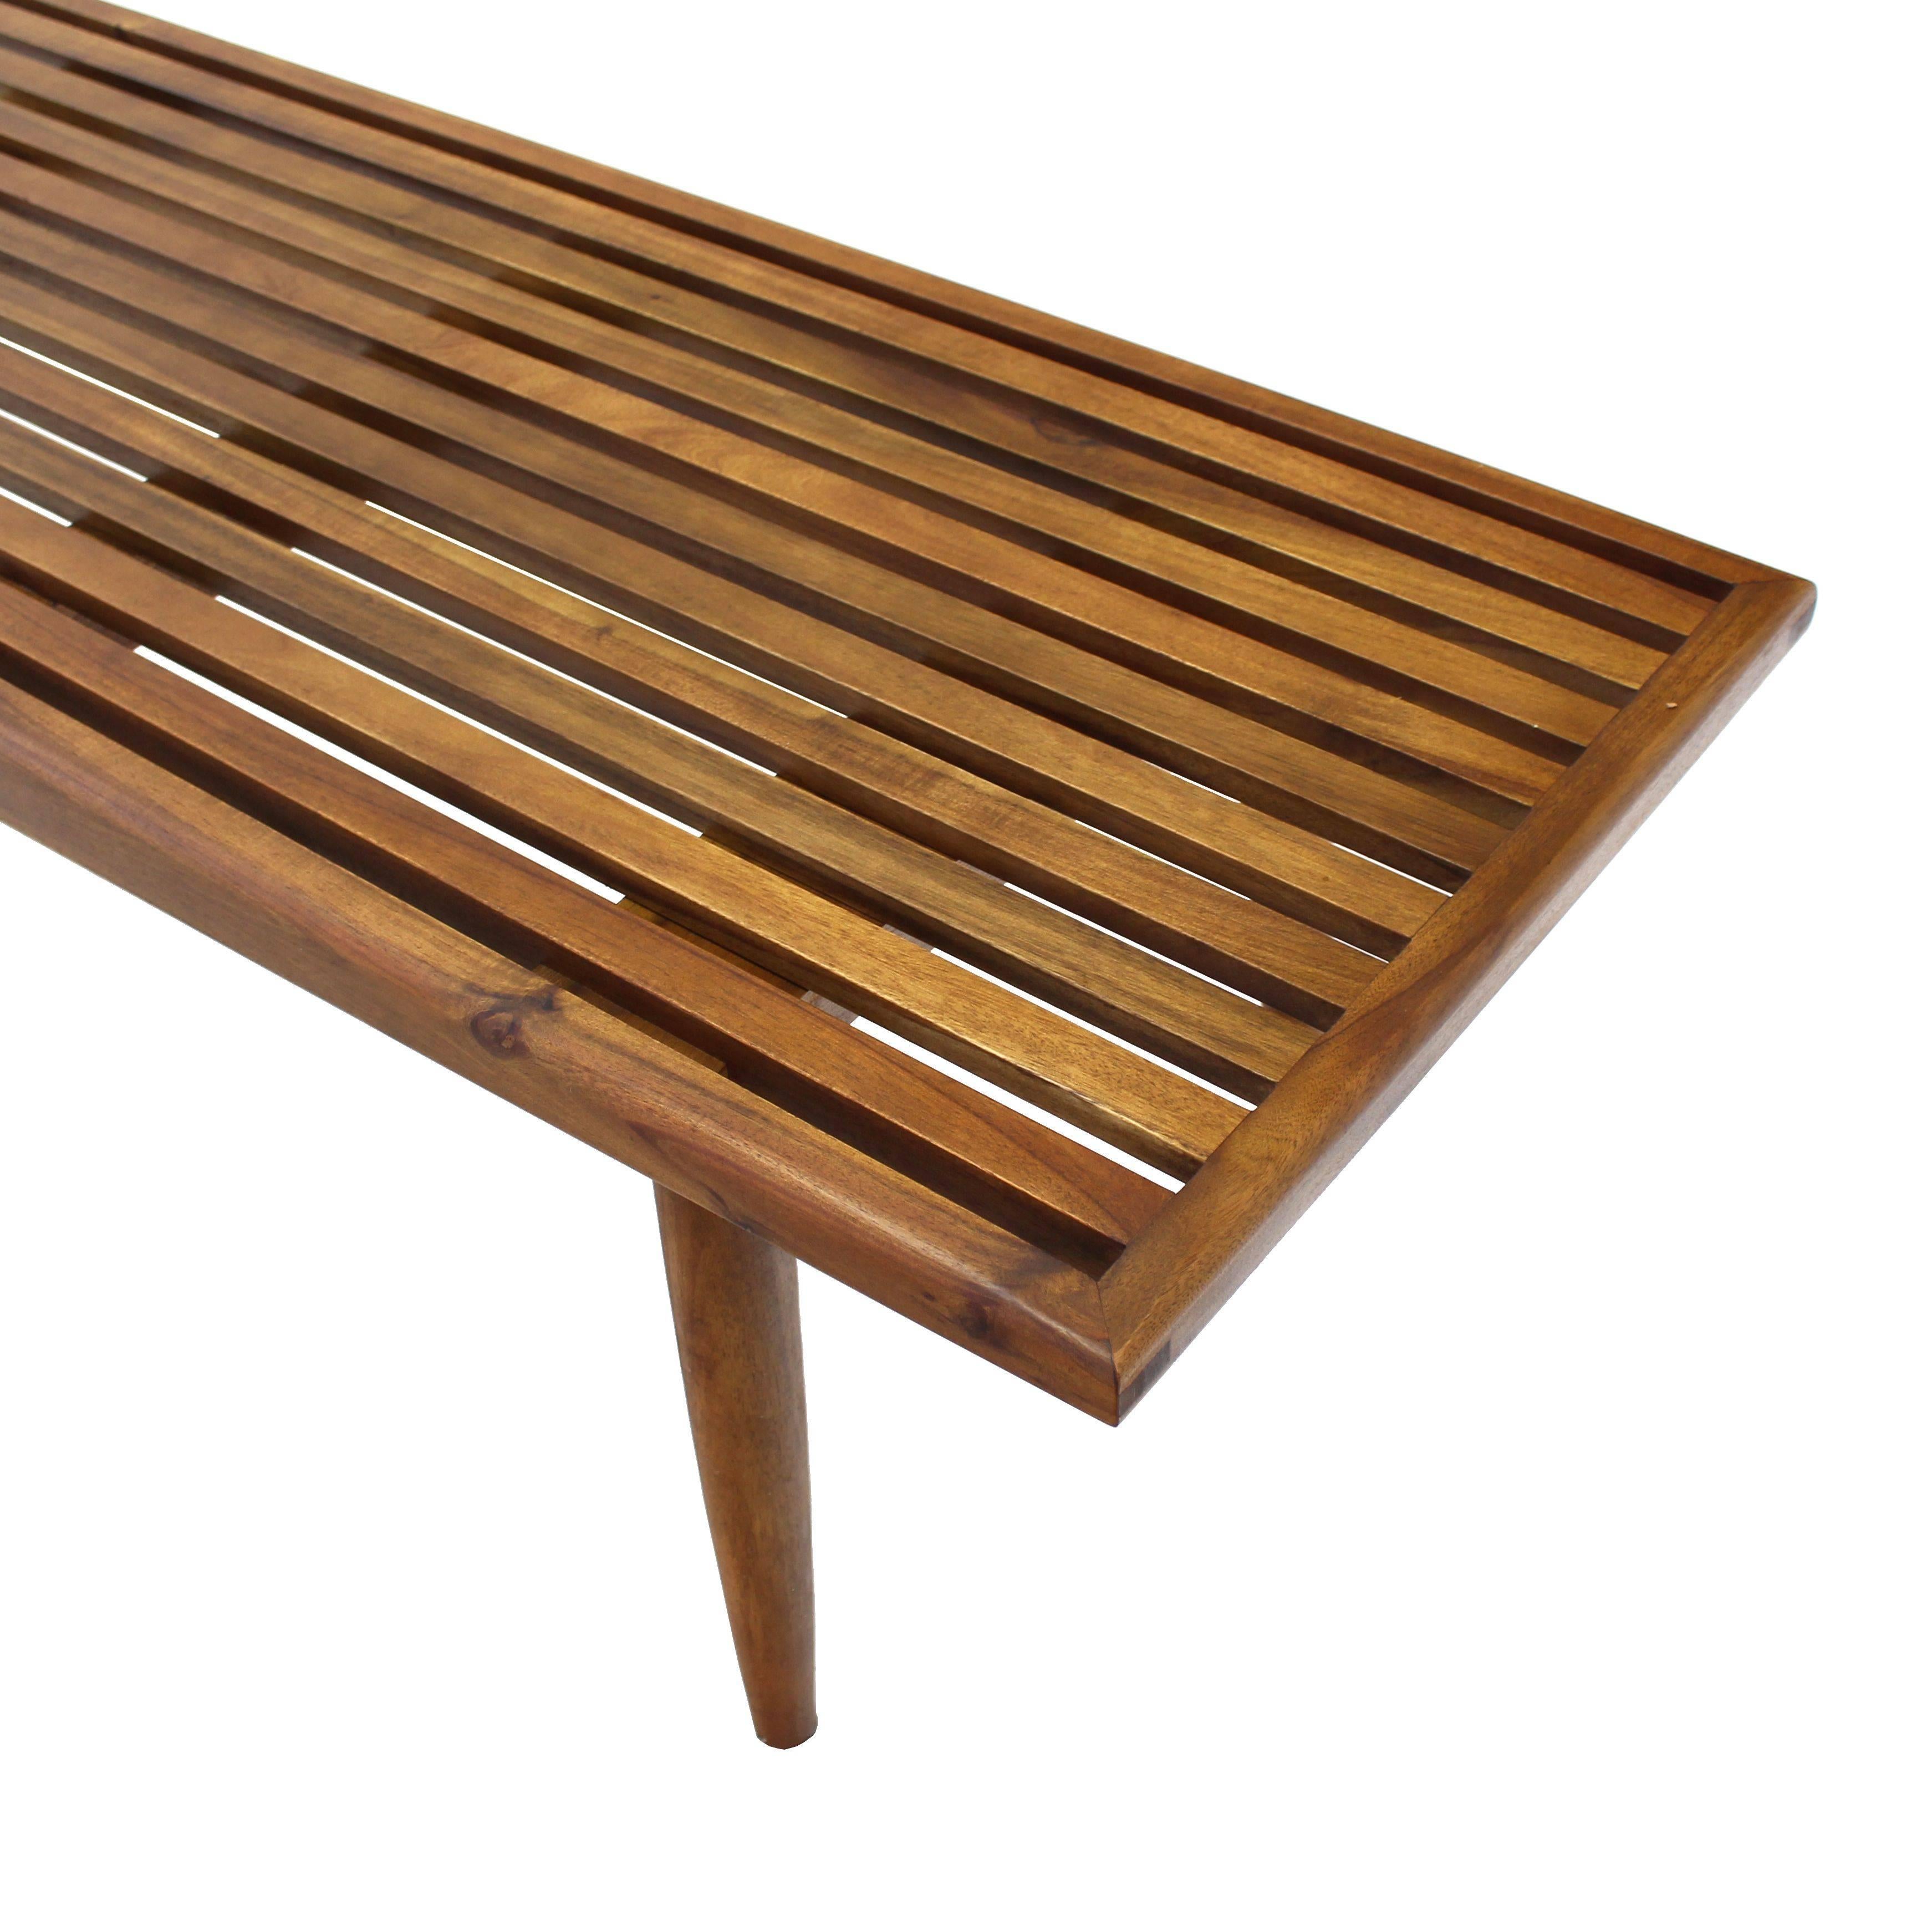 Solid Oiled Slat Wood Bench 1